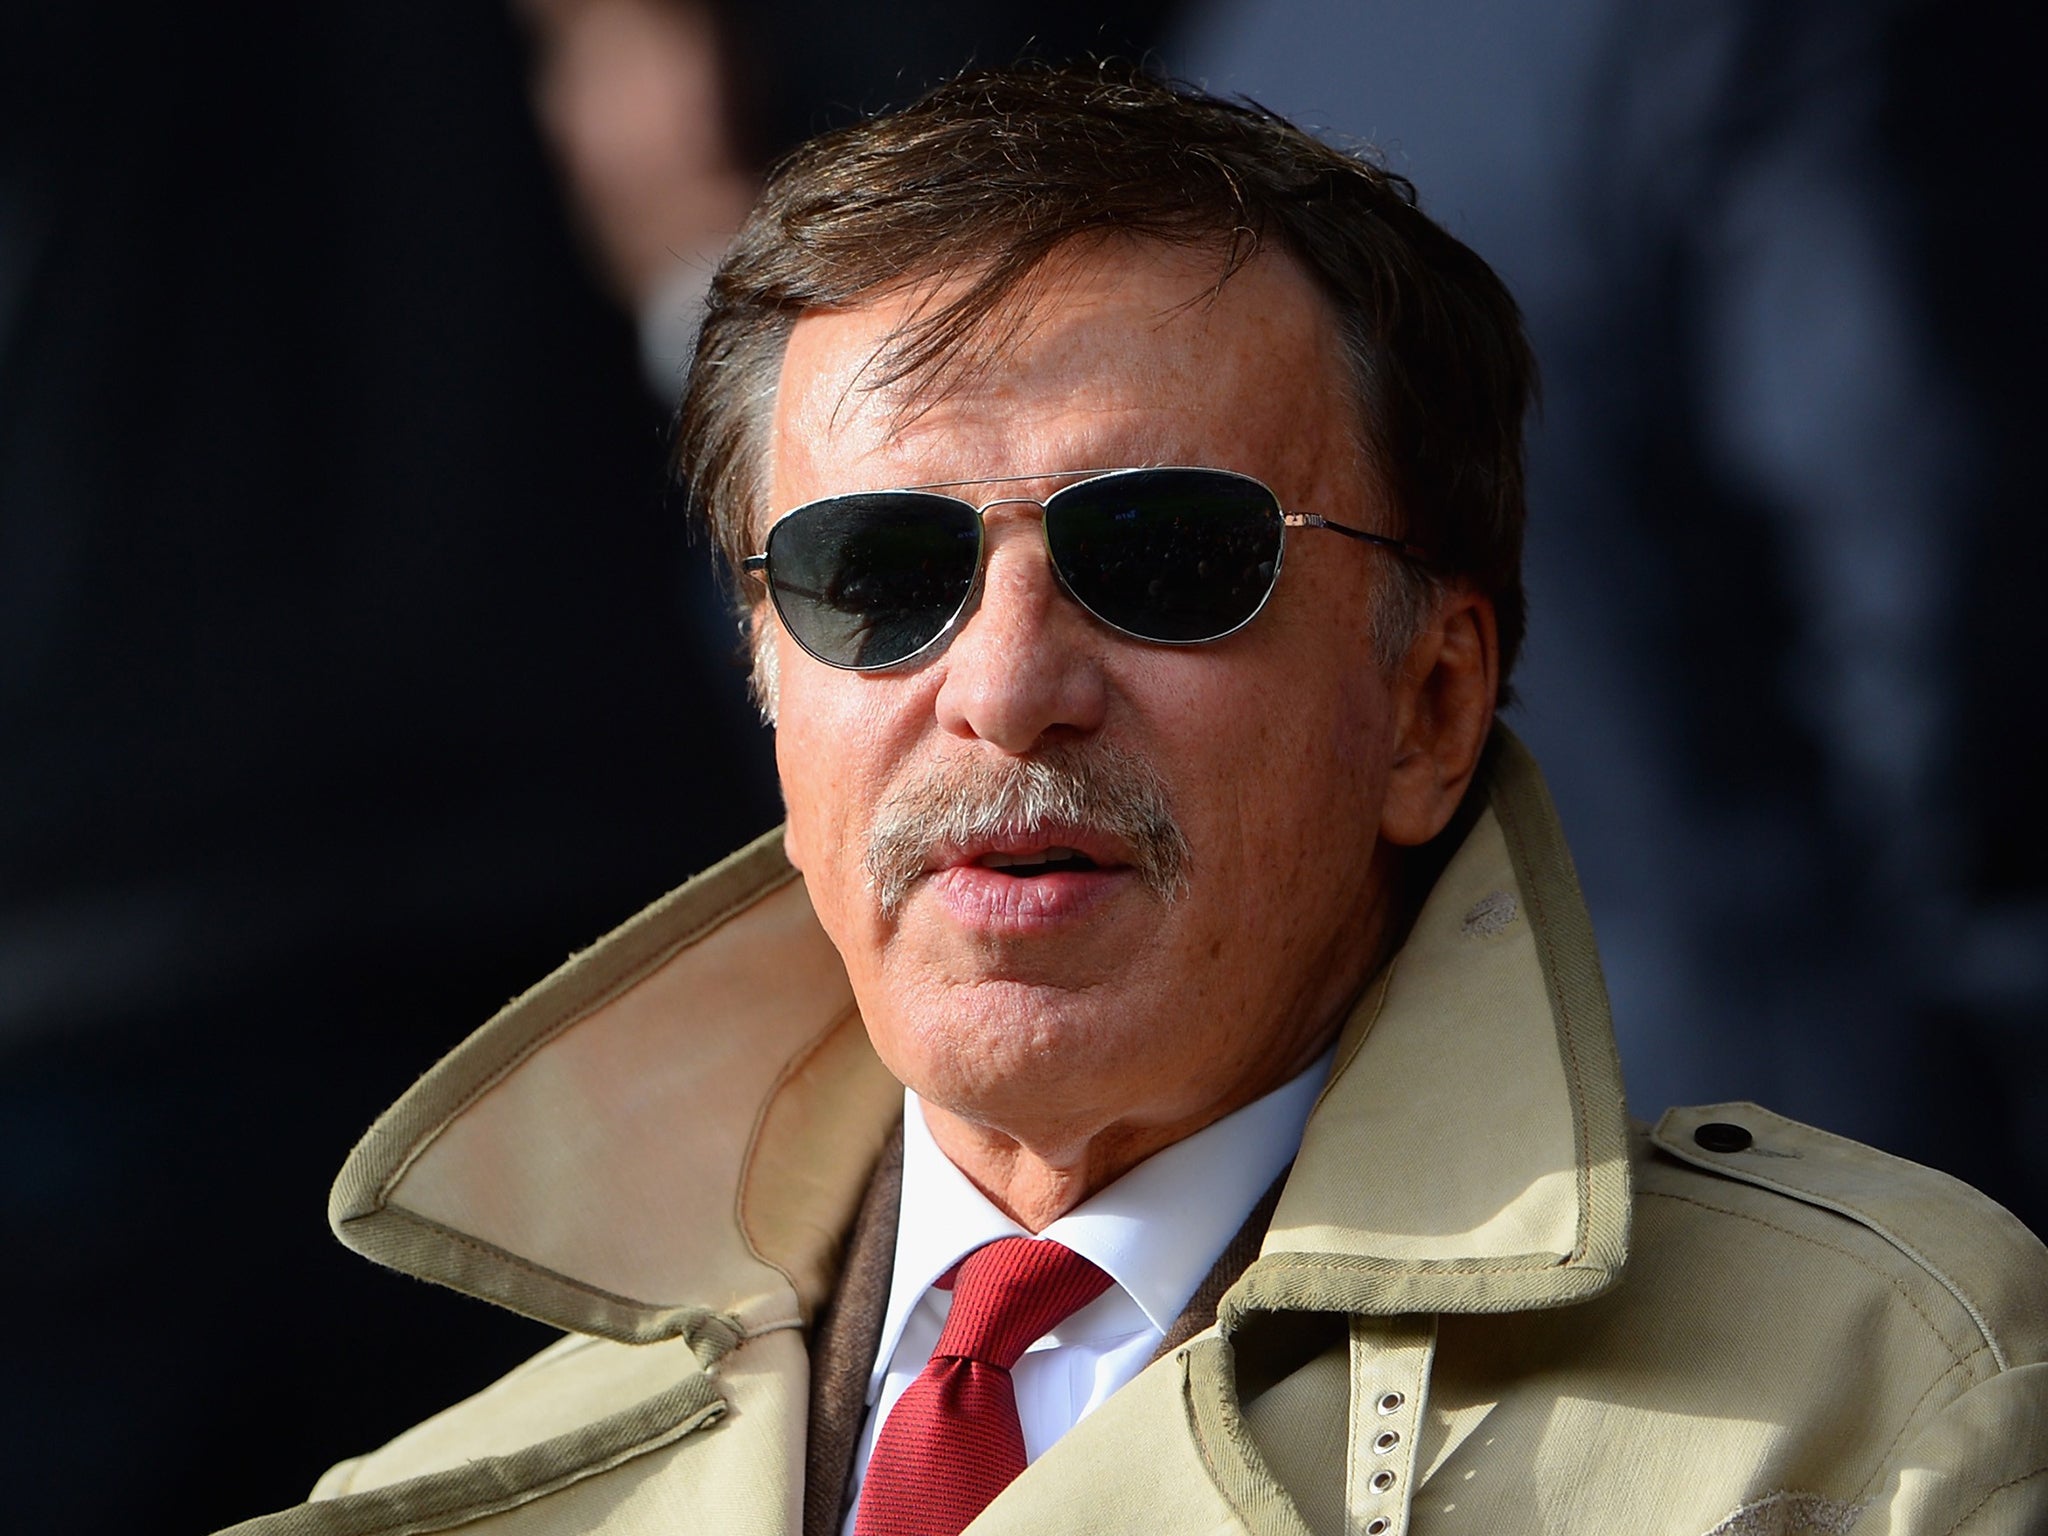 &#13;
Stan Kroenke will be questioned over a second £3m payment&#13;